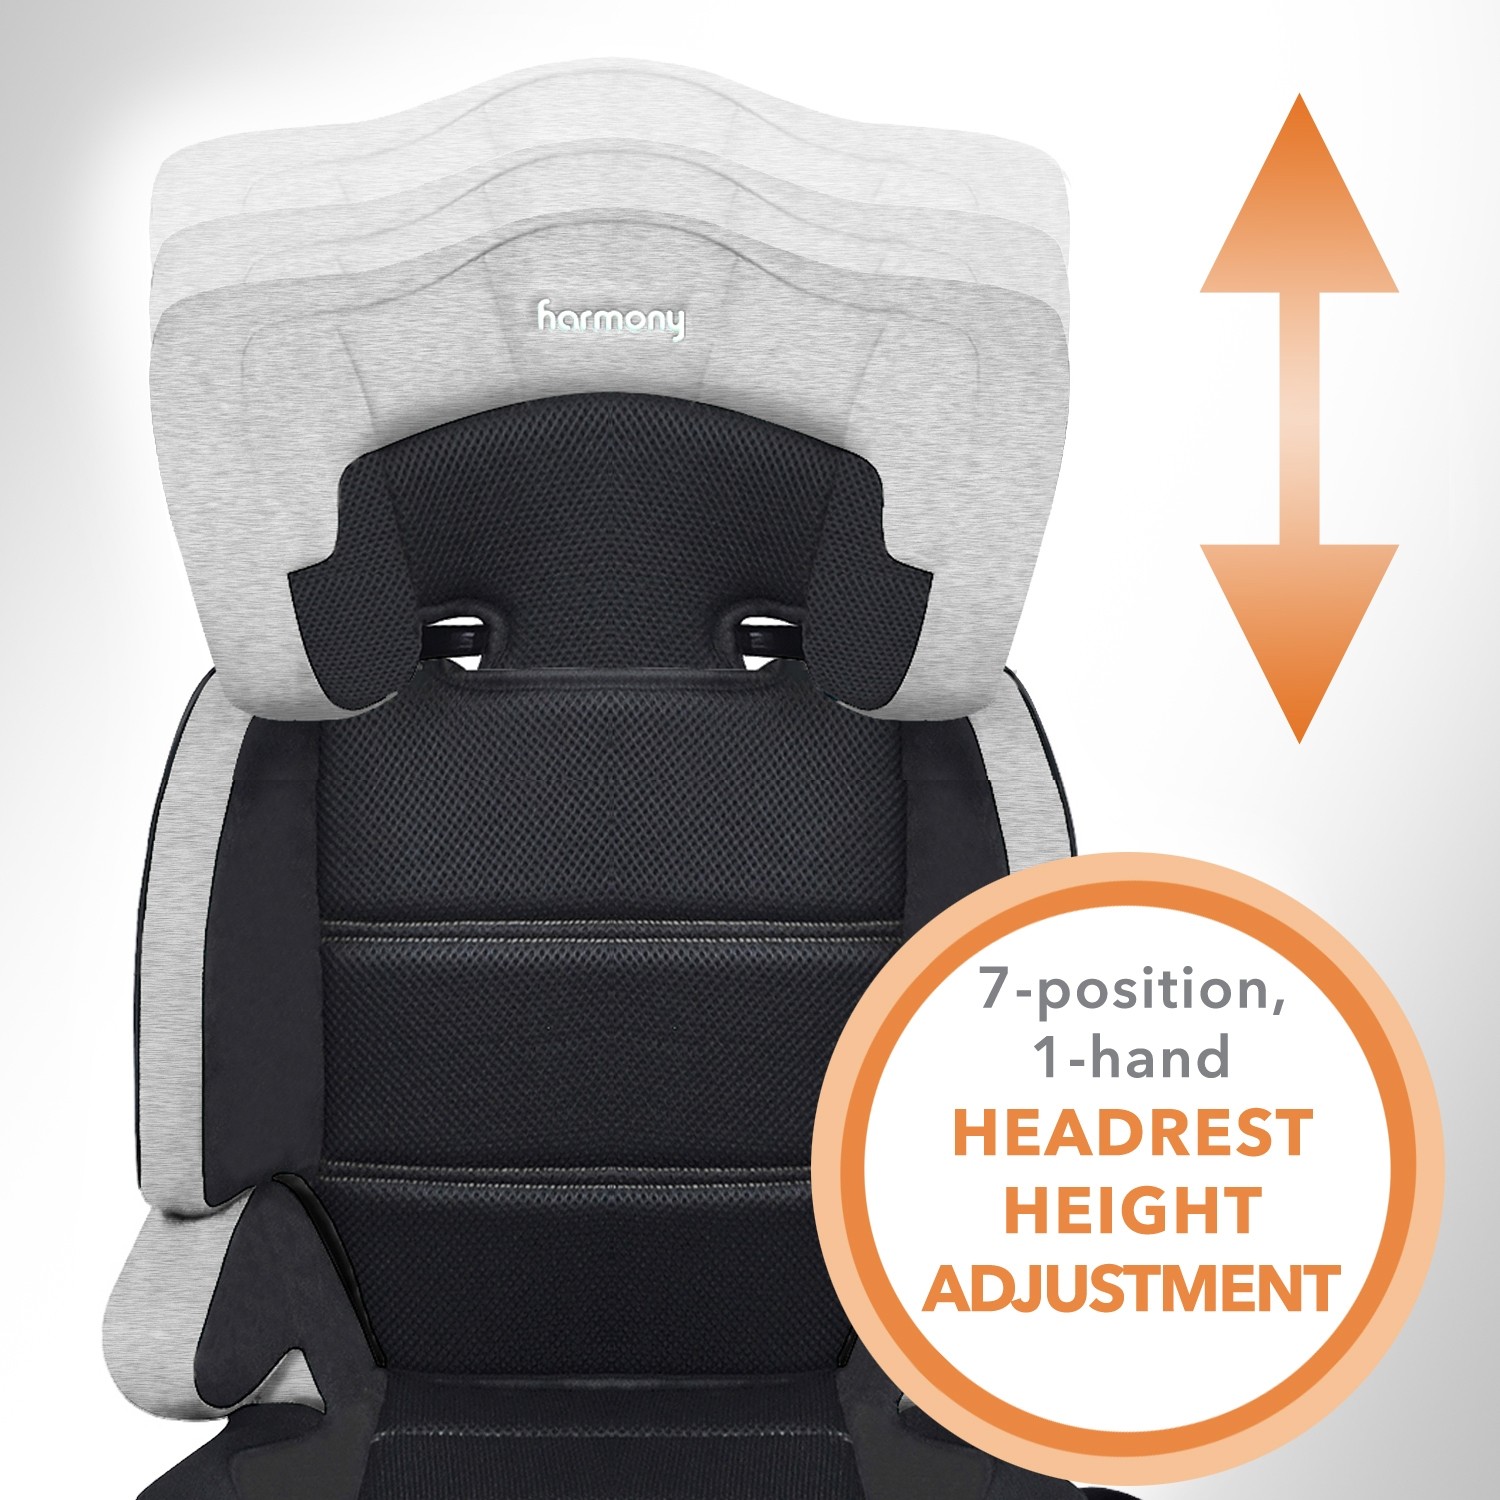 Dreamtime Deluxe Comfort Booster Car Seat - Heather Grey